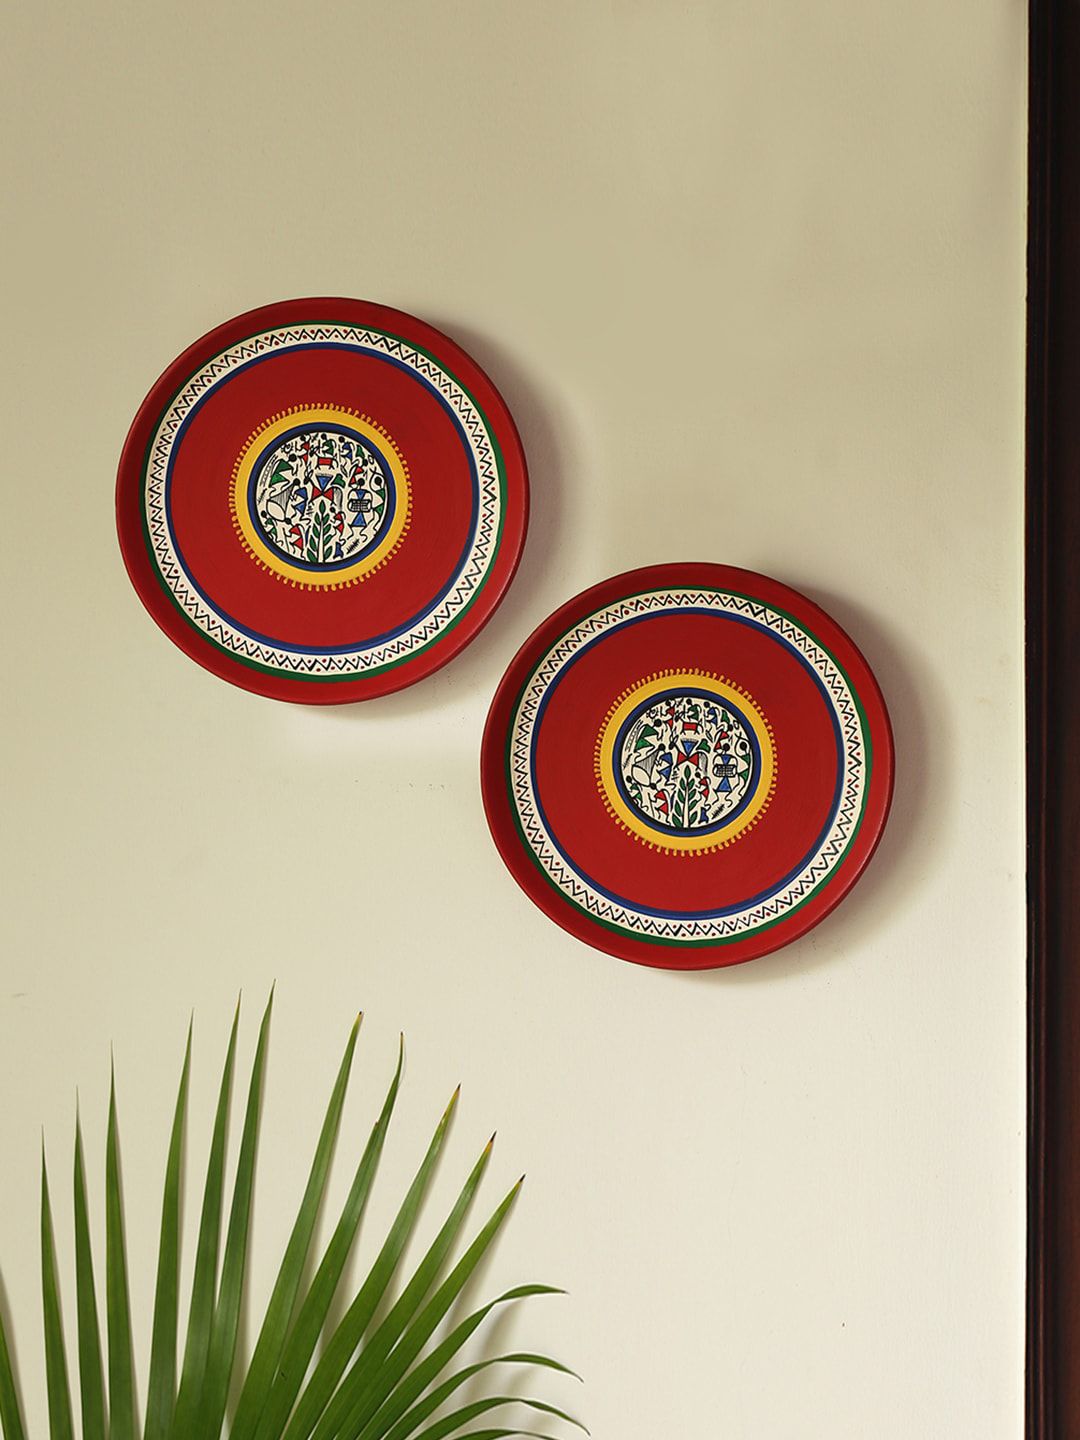 ExclusiveLane Set of 2 Terracotta Warli Wall Plates Handpainted Wall Decor Price in India